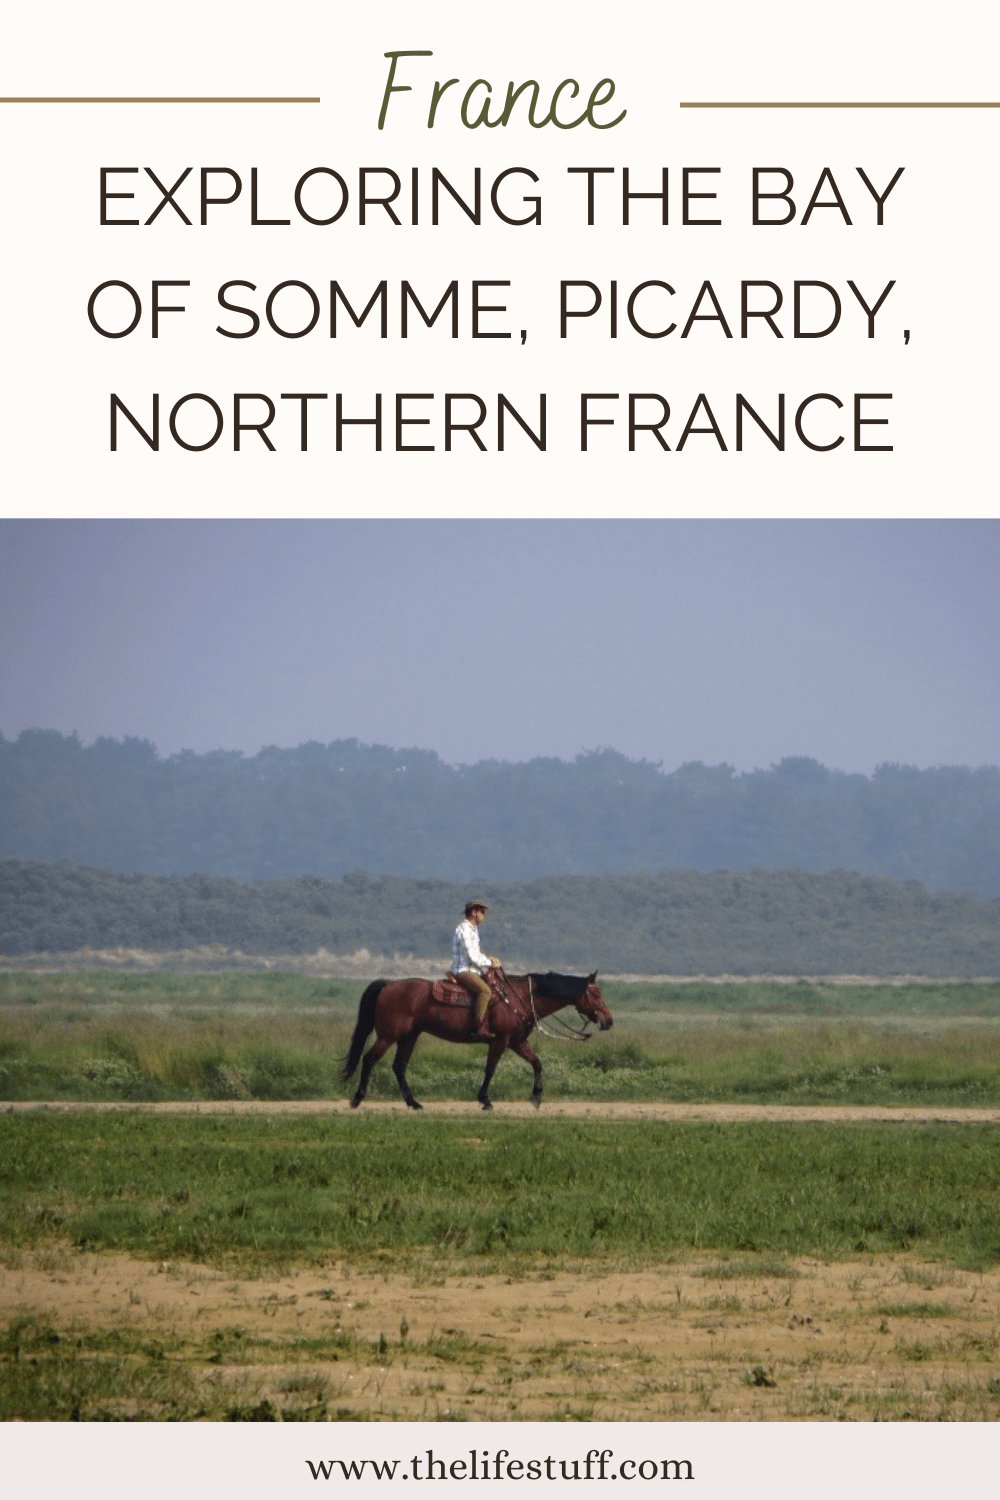 Exploring The Bay of Somme, Picardy, Northern France - The Life of Stuff